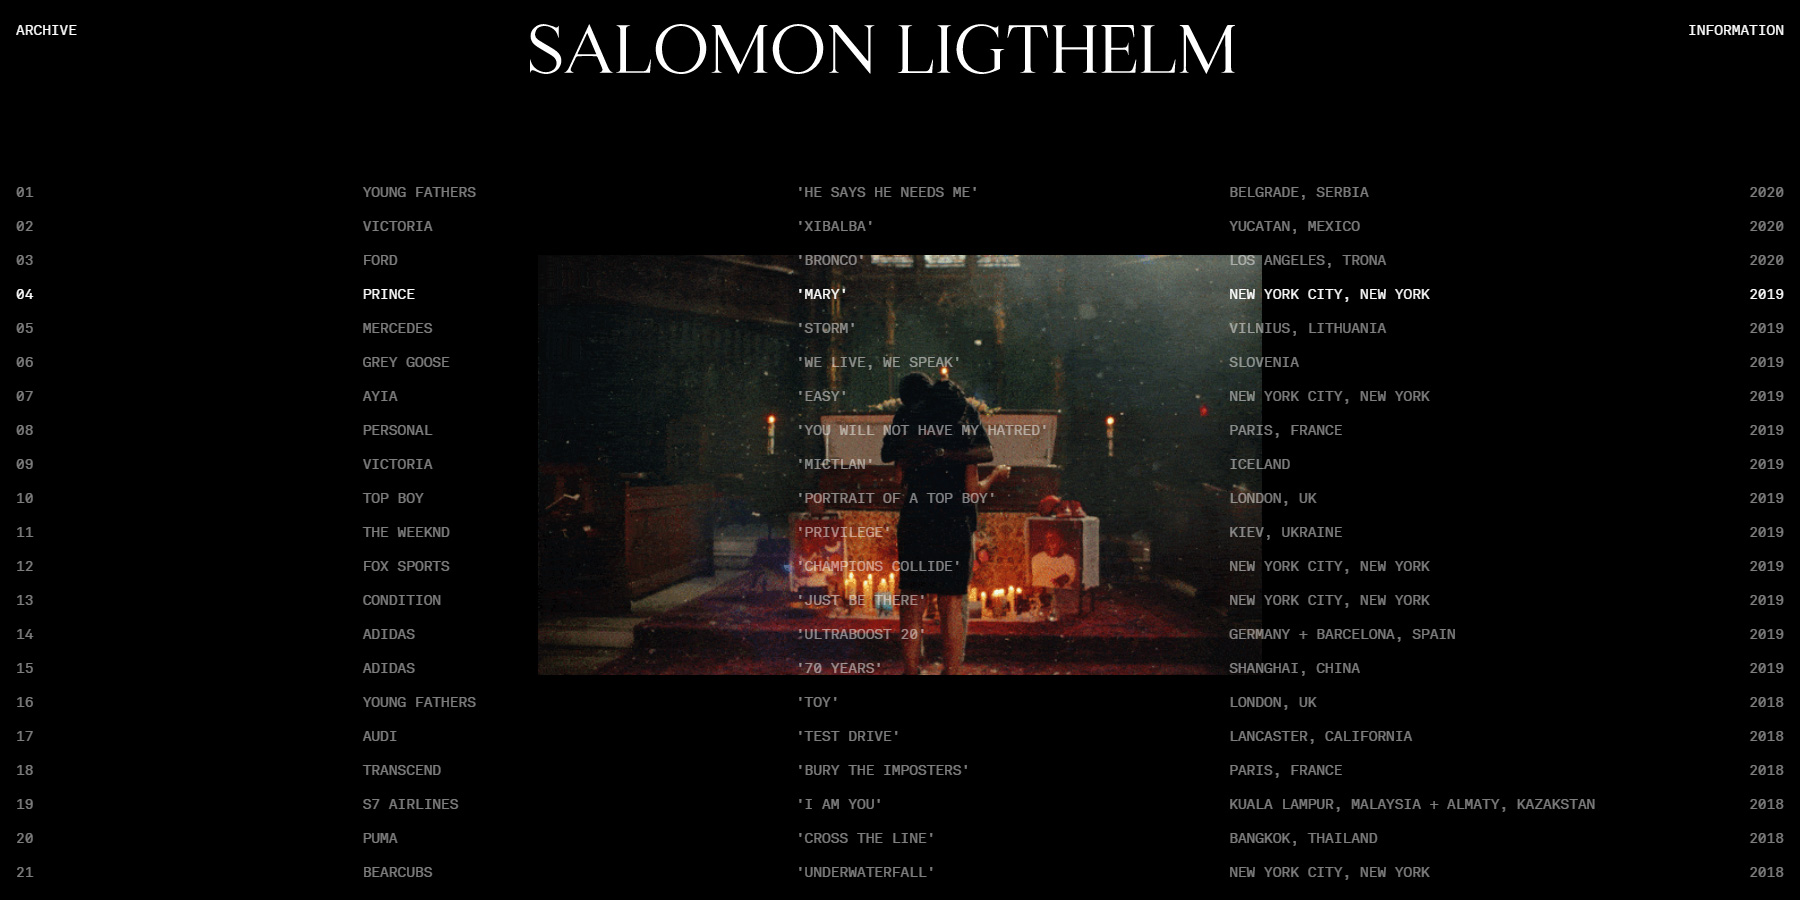 Salomon Ligthelm - Website of the Day